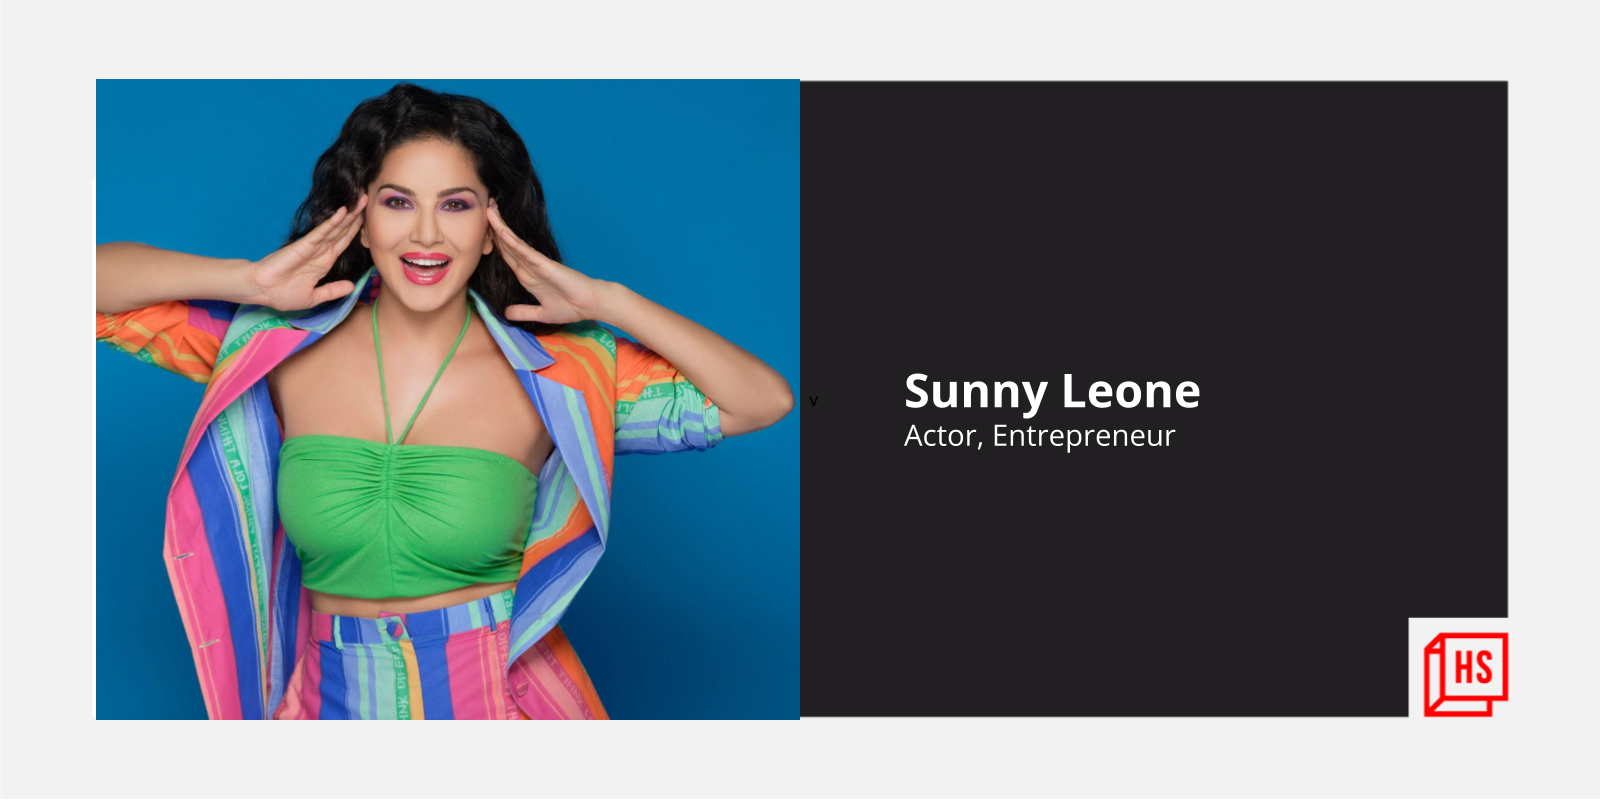 [HS Exclusive] Acting is my passion, but being an entrepreneur comes naturally: Sunny Leone 

